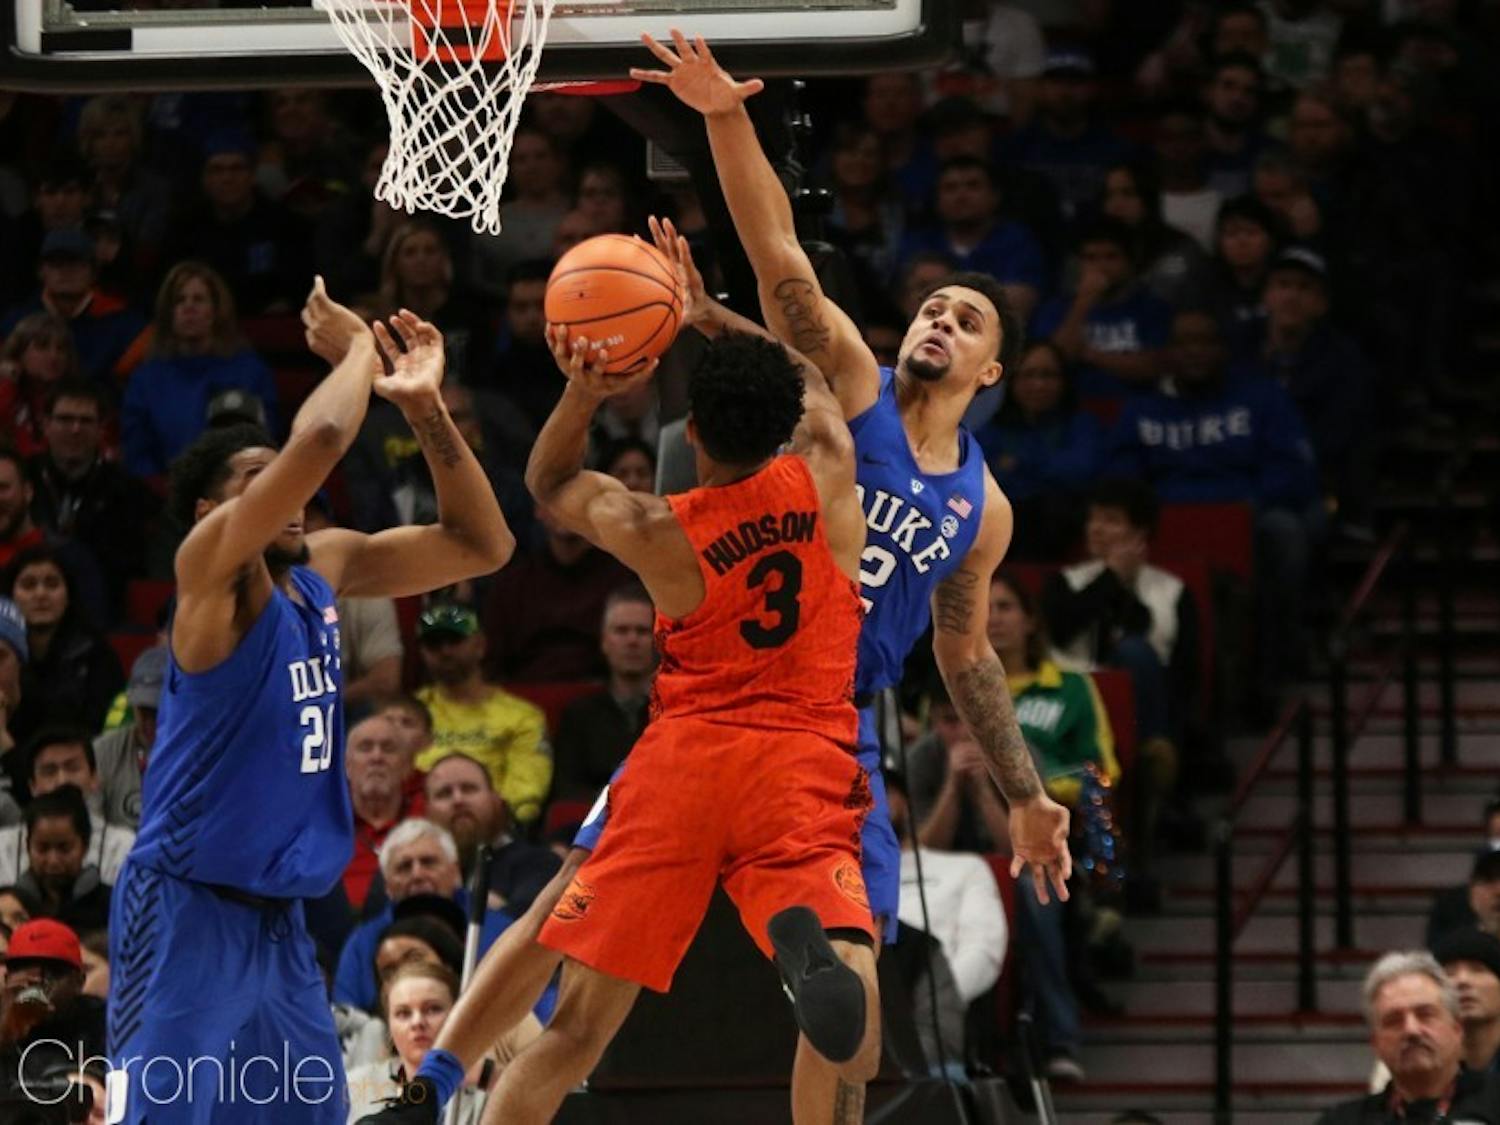 Duke contained Florida's guards and held the Gators to just 10 points in the last 10 minutes.